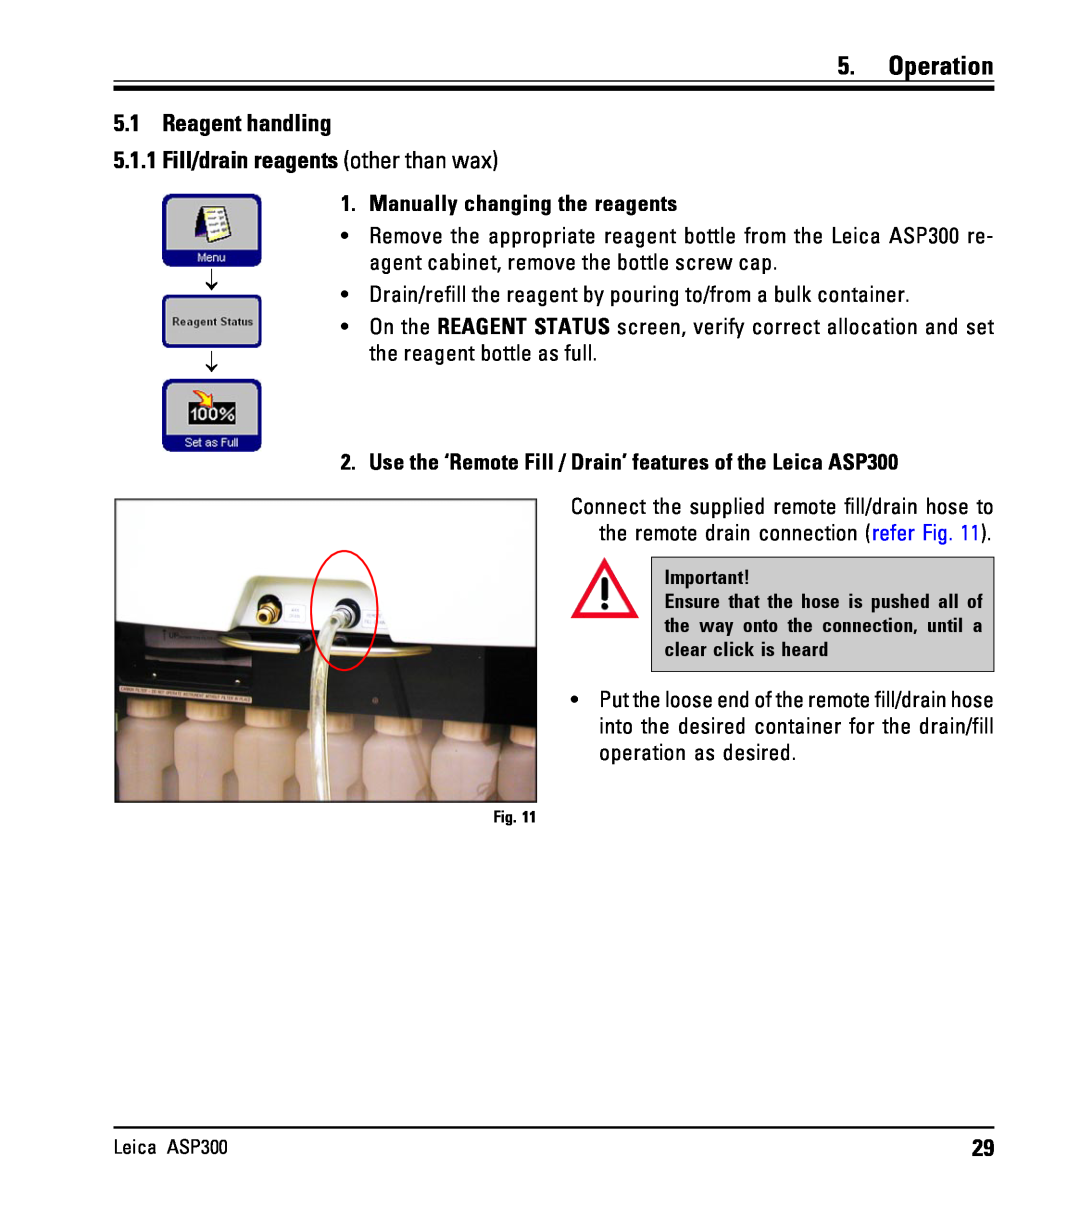 Leica ASP300 instruction manual Operation, Reagent handling, 5.1.1Fill/drain reagents other than wax 